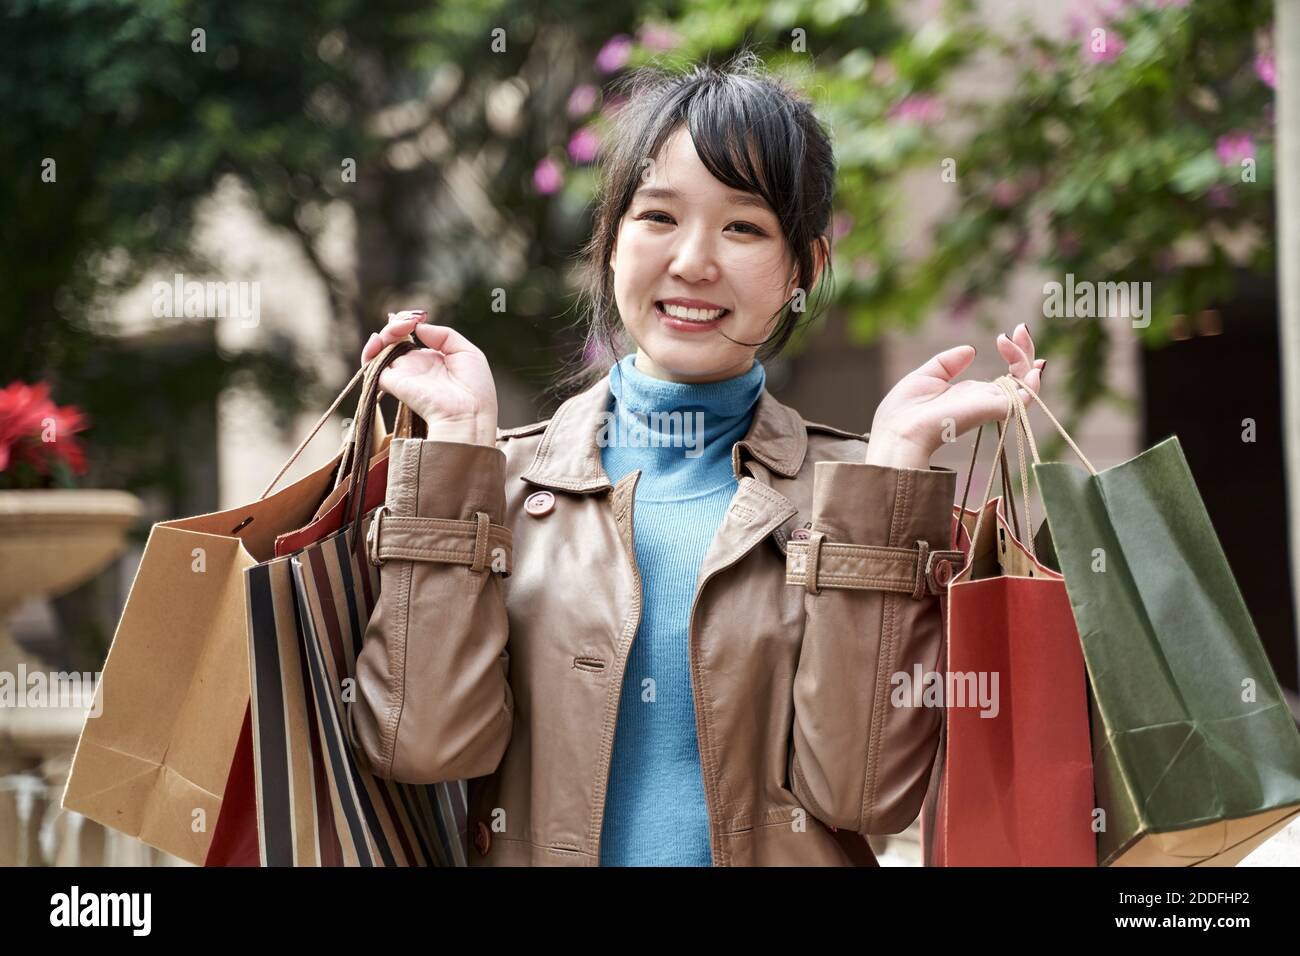 beautiful happy young asian carrying shopping bags looking at camera smiling Stock Photo